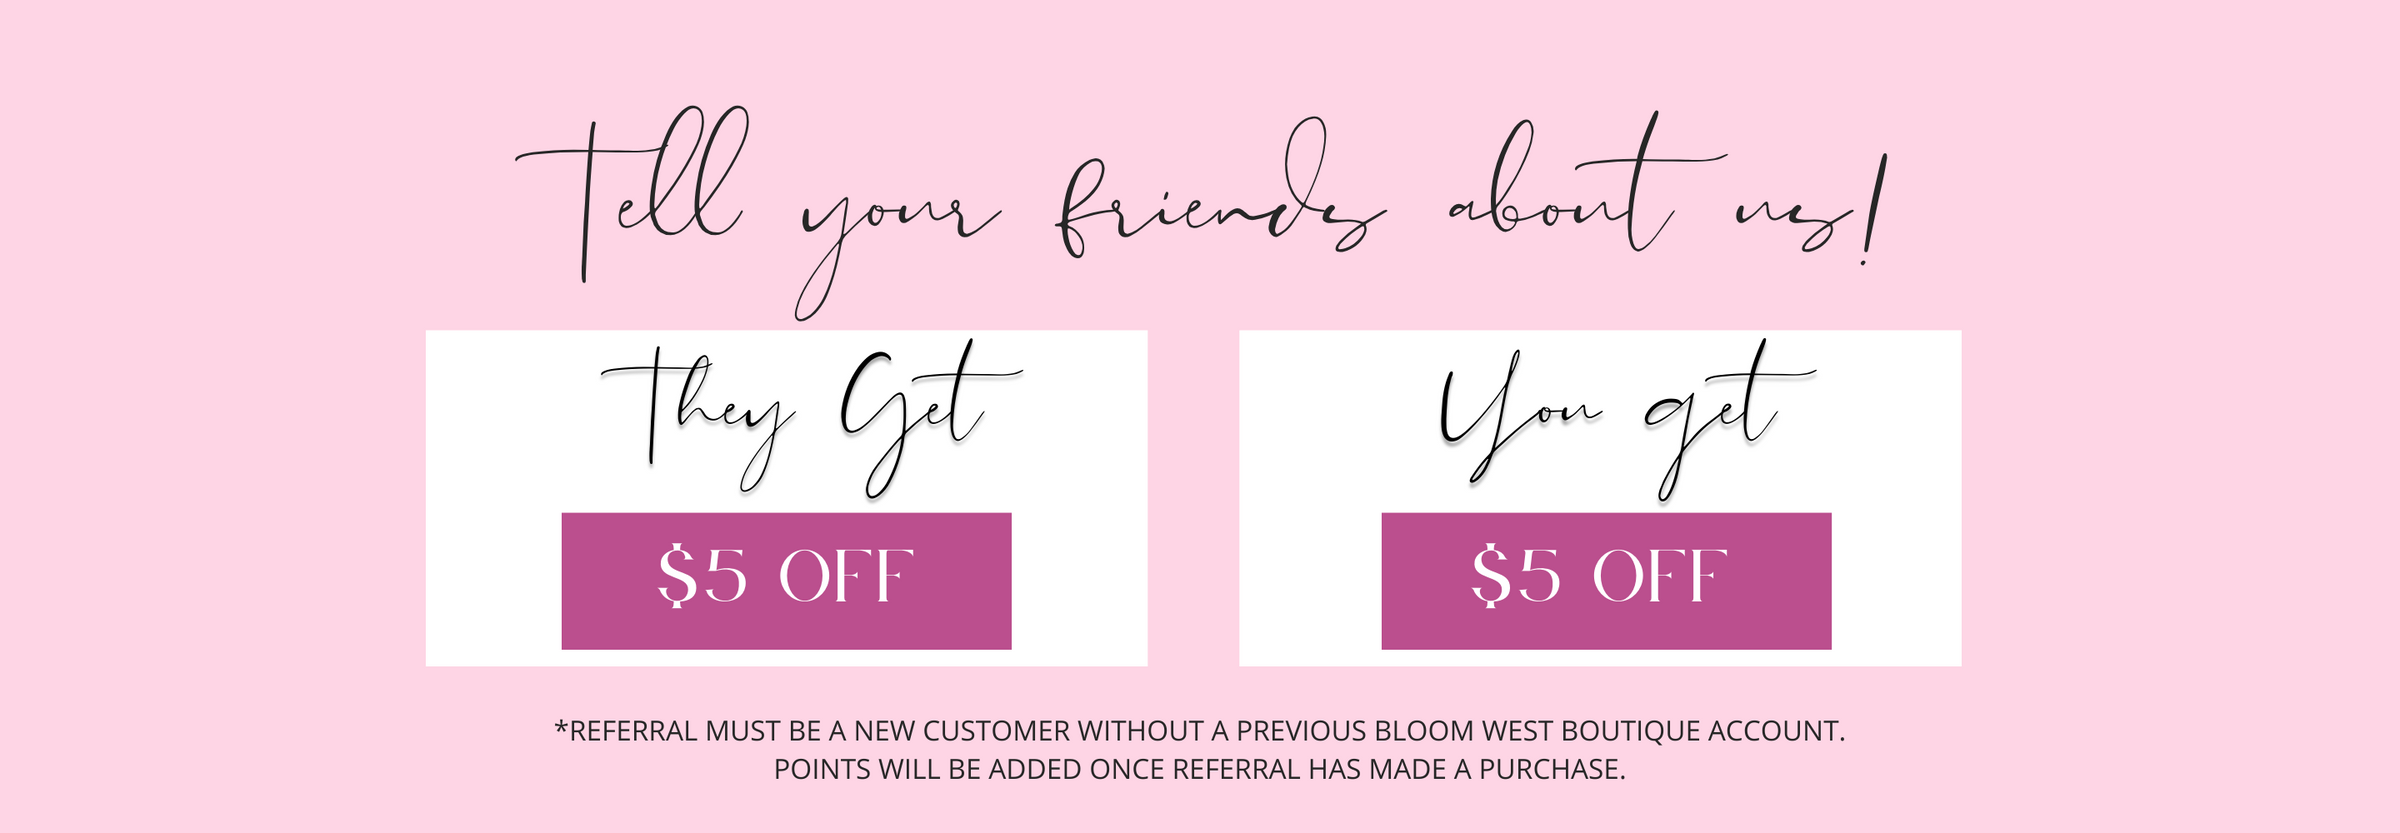 tell your friends about us. They get $5 off. You get $5 off. *REFERRAL MUST BE A NEW CUSTOMER WITHOUT A PREVIOUS Bloom West Boutique Account.   POINTS WILL BE ADDED ONCE REFERRAL HAS MADE A PURCHASE.